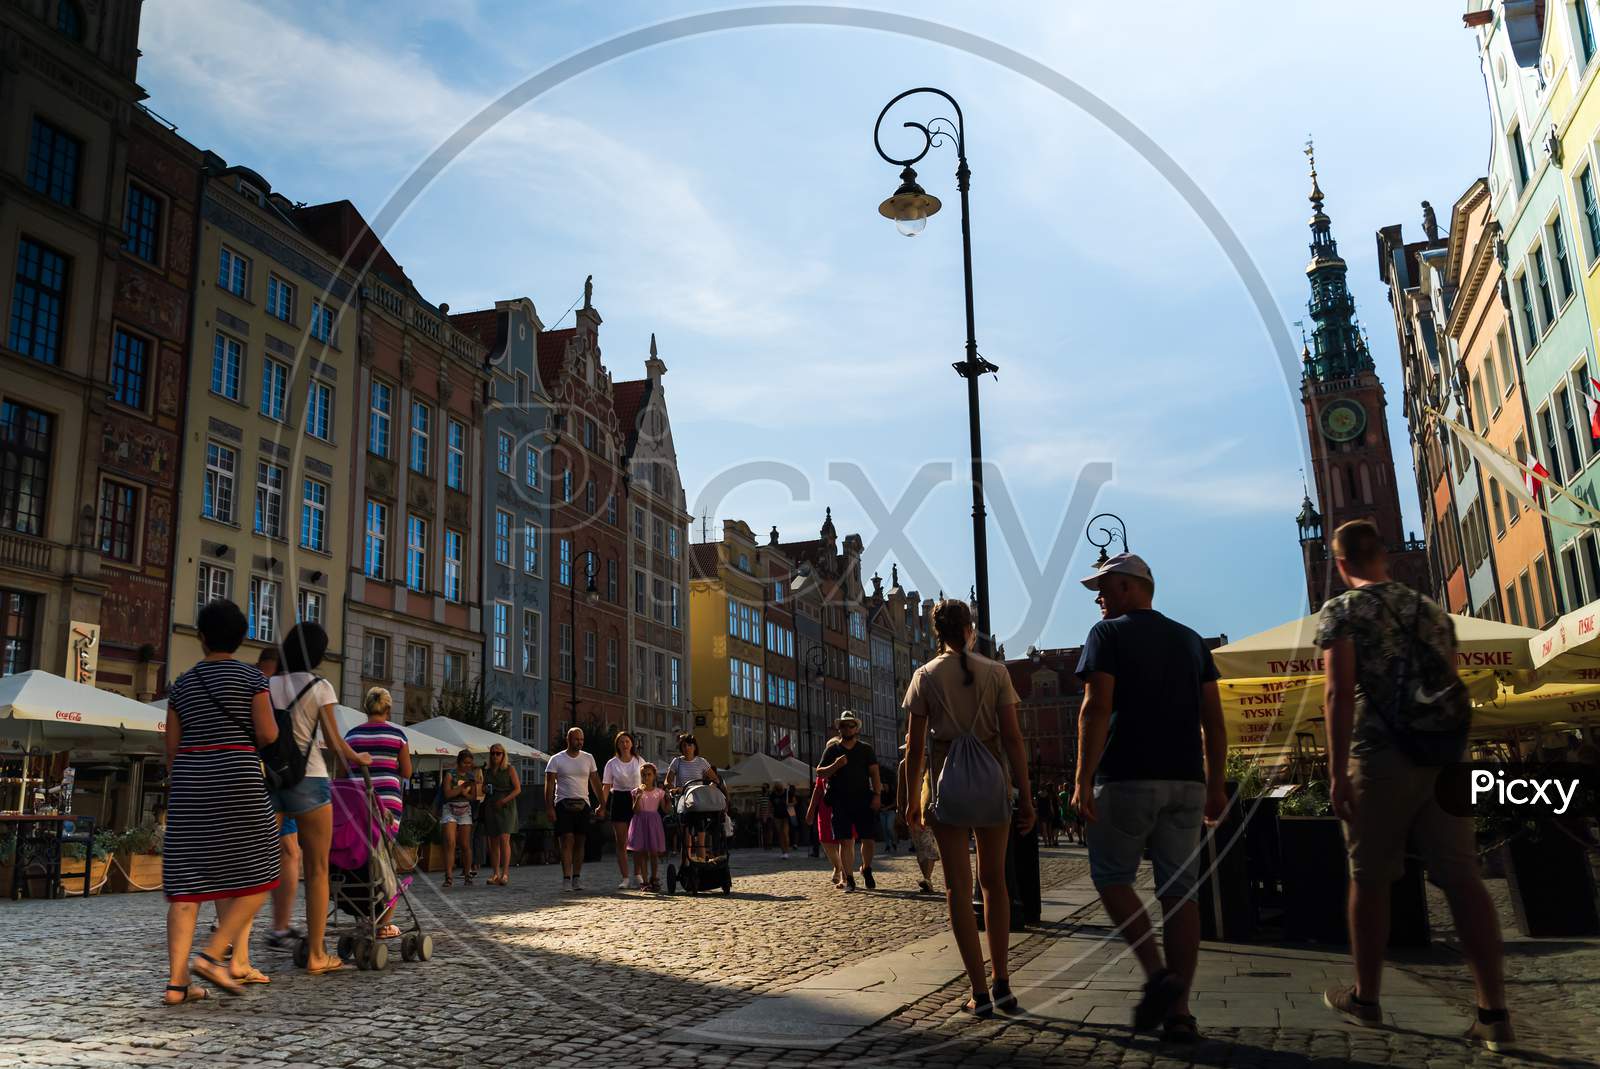 Gdansk, North Poland - August 13, 2020: Tourists Walking Next To Neptune'S Fountain Touristic Spot In Main Square City Center During Covid 19 Pandemic